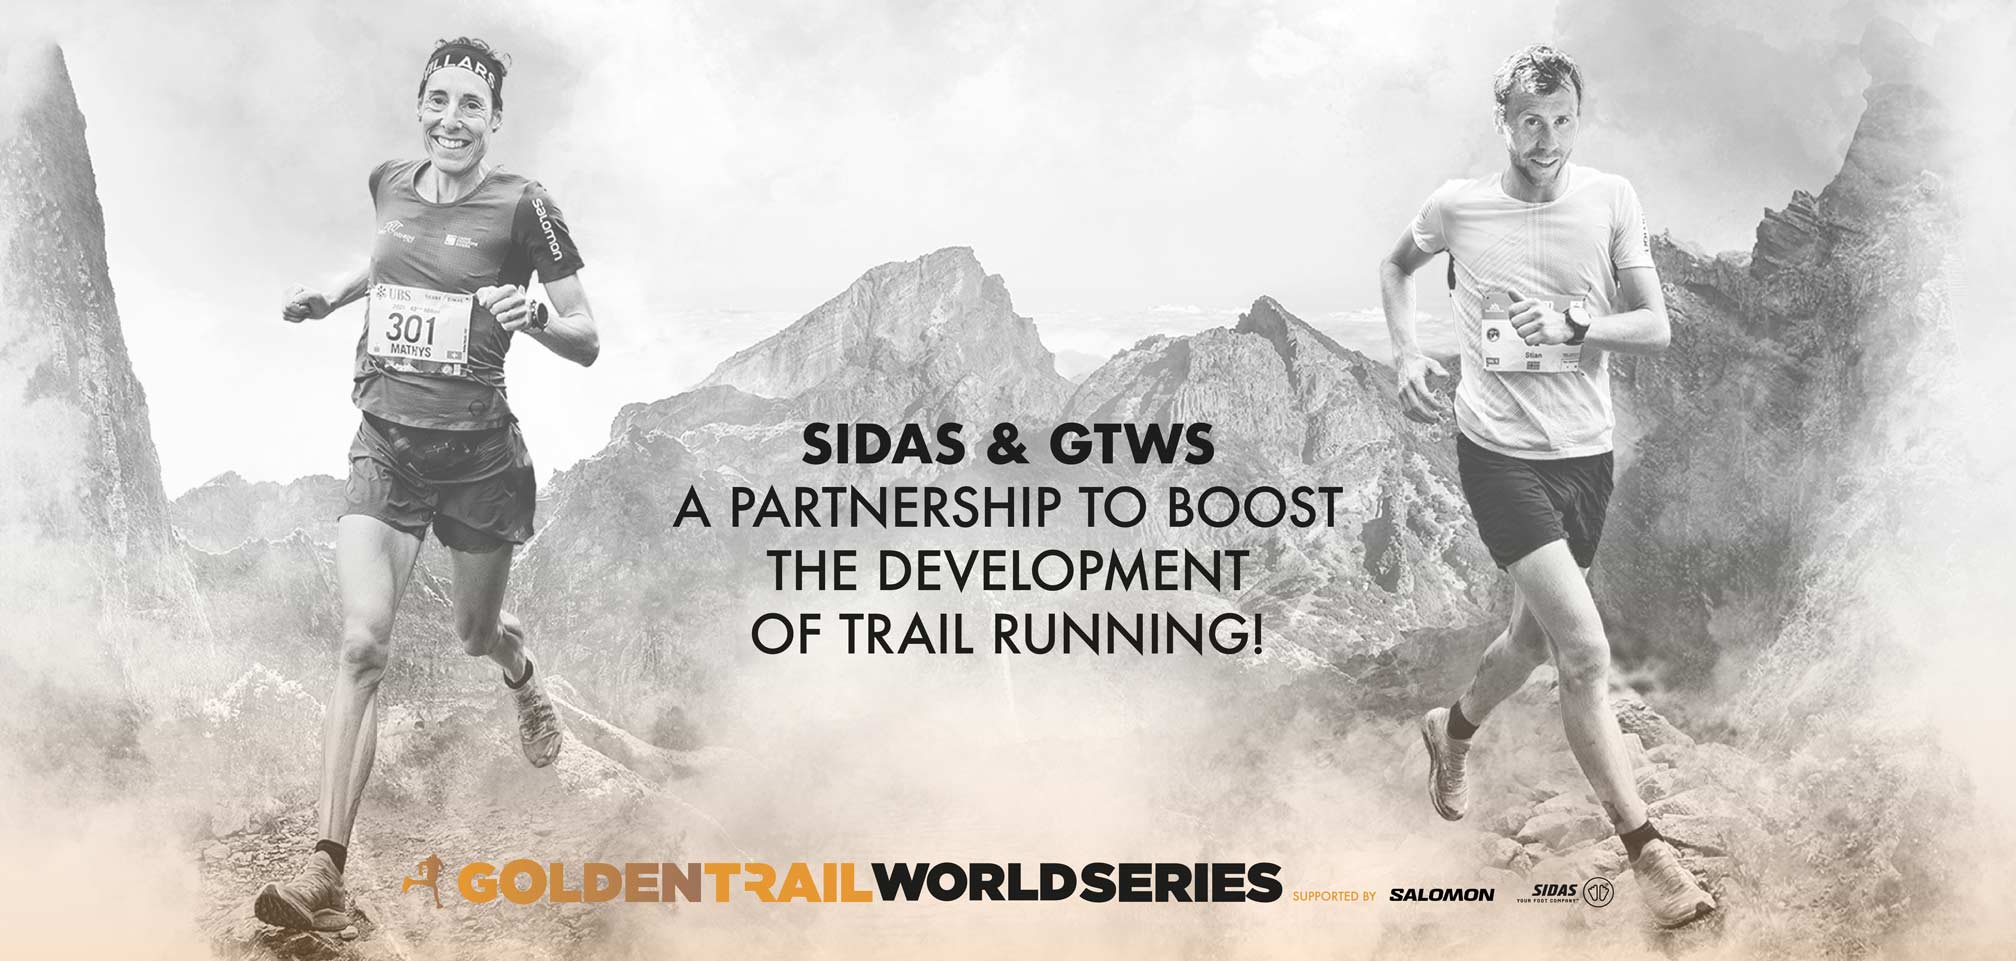 Sidas & the Golden Trail World Series, a partnership to boost the trail running development